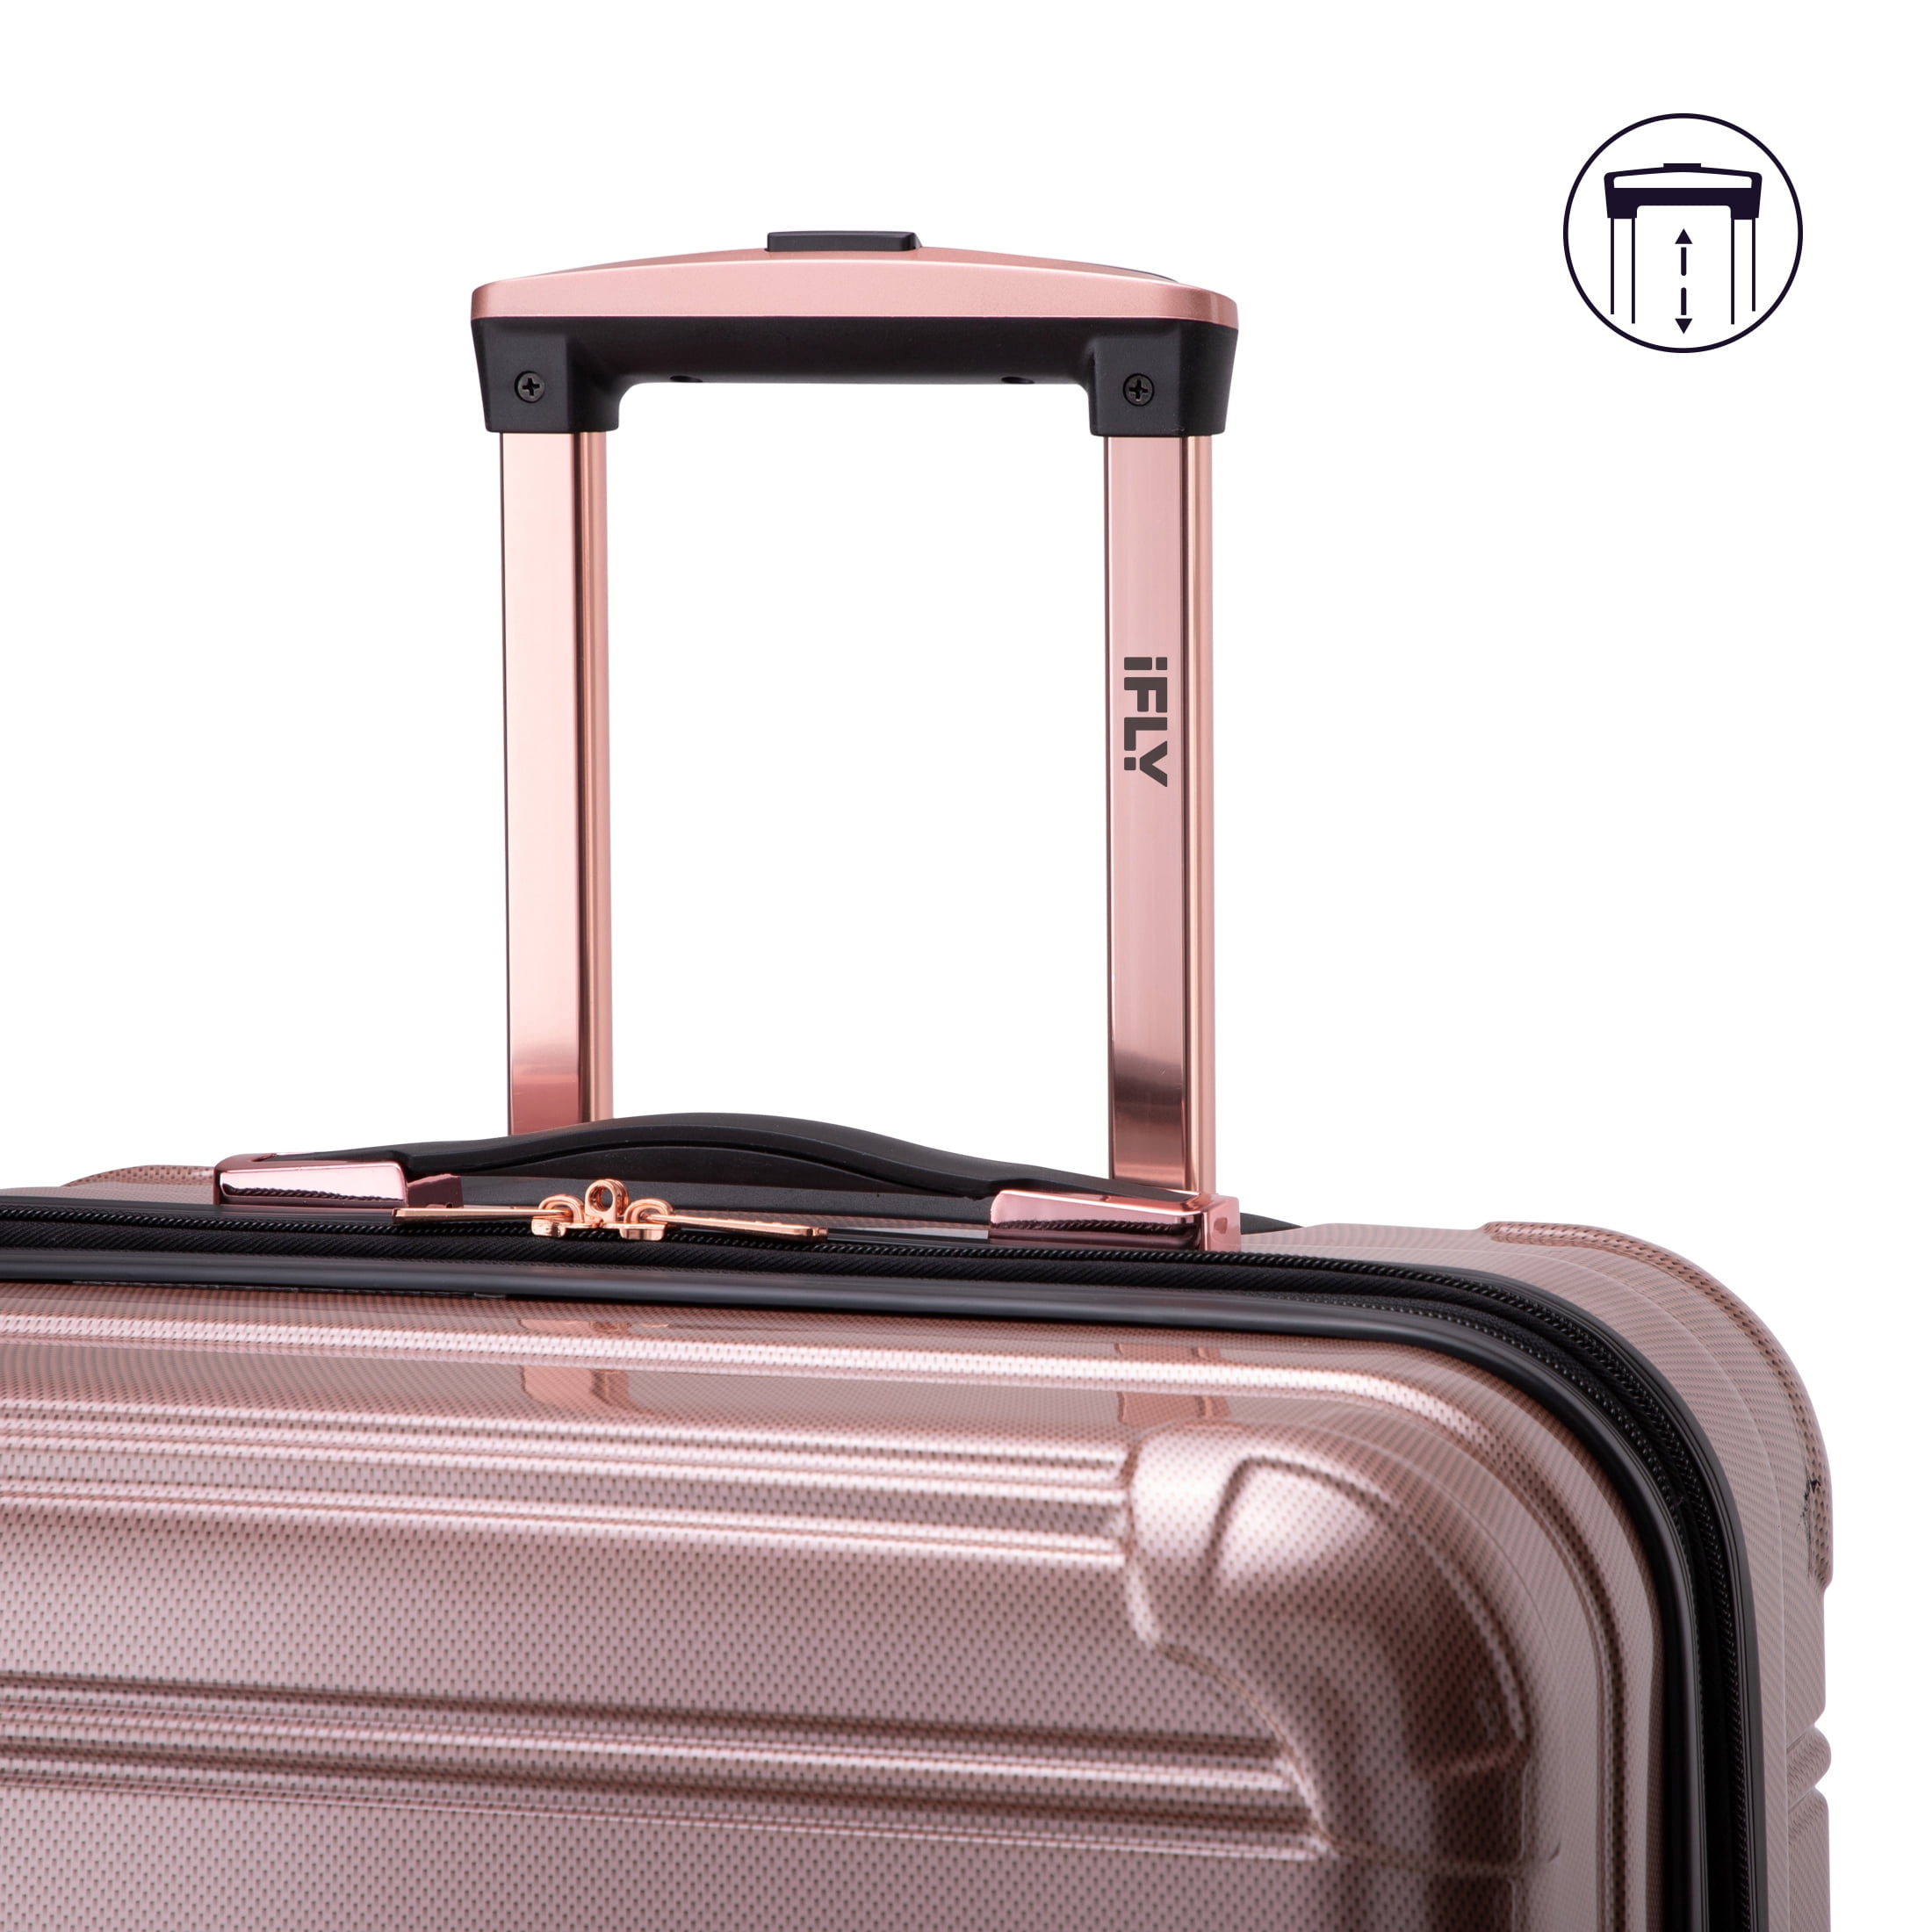 iFLY Hardside Luggage Fibertech 2 Piece Set, 20-inch Carry-on and 28-inch Checked Luggage, Rose Gold - 2